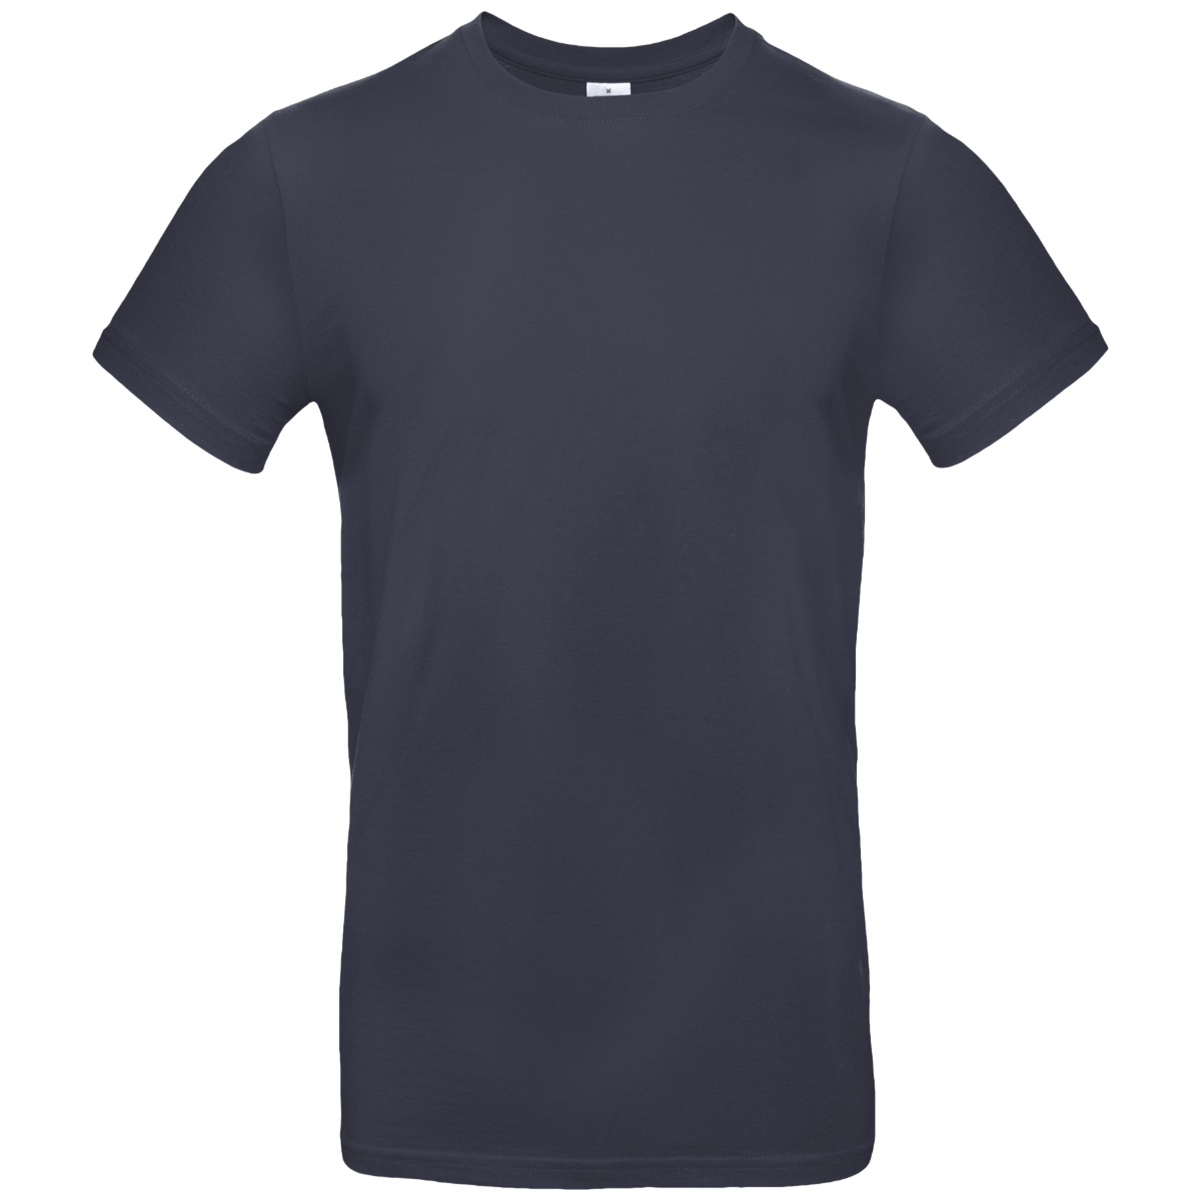 Tee-Shirt Homme Personnalisable Sur Tunetoo Navy